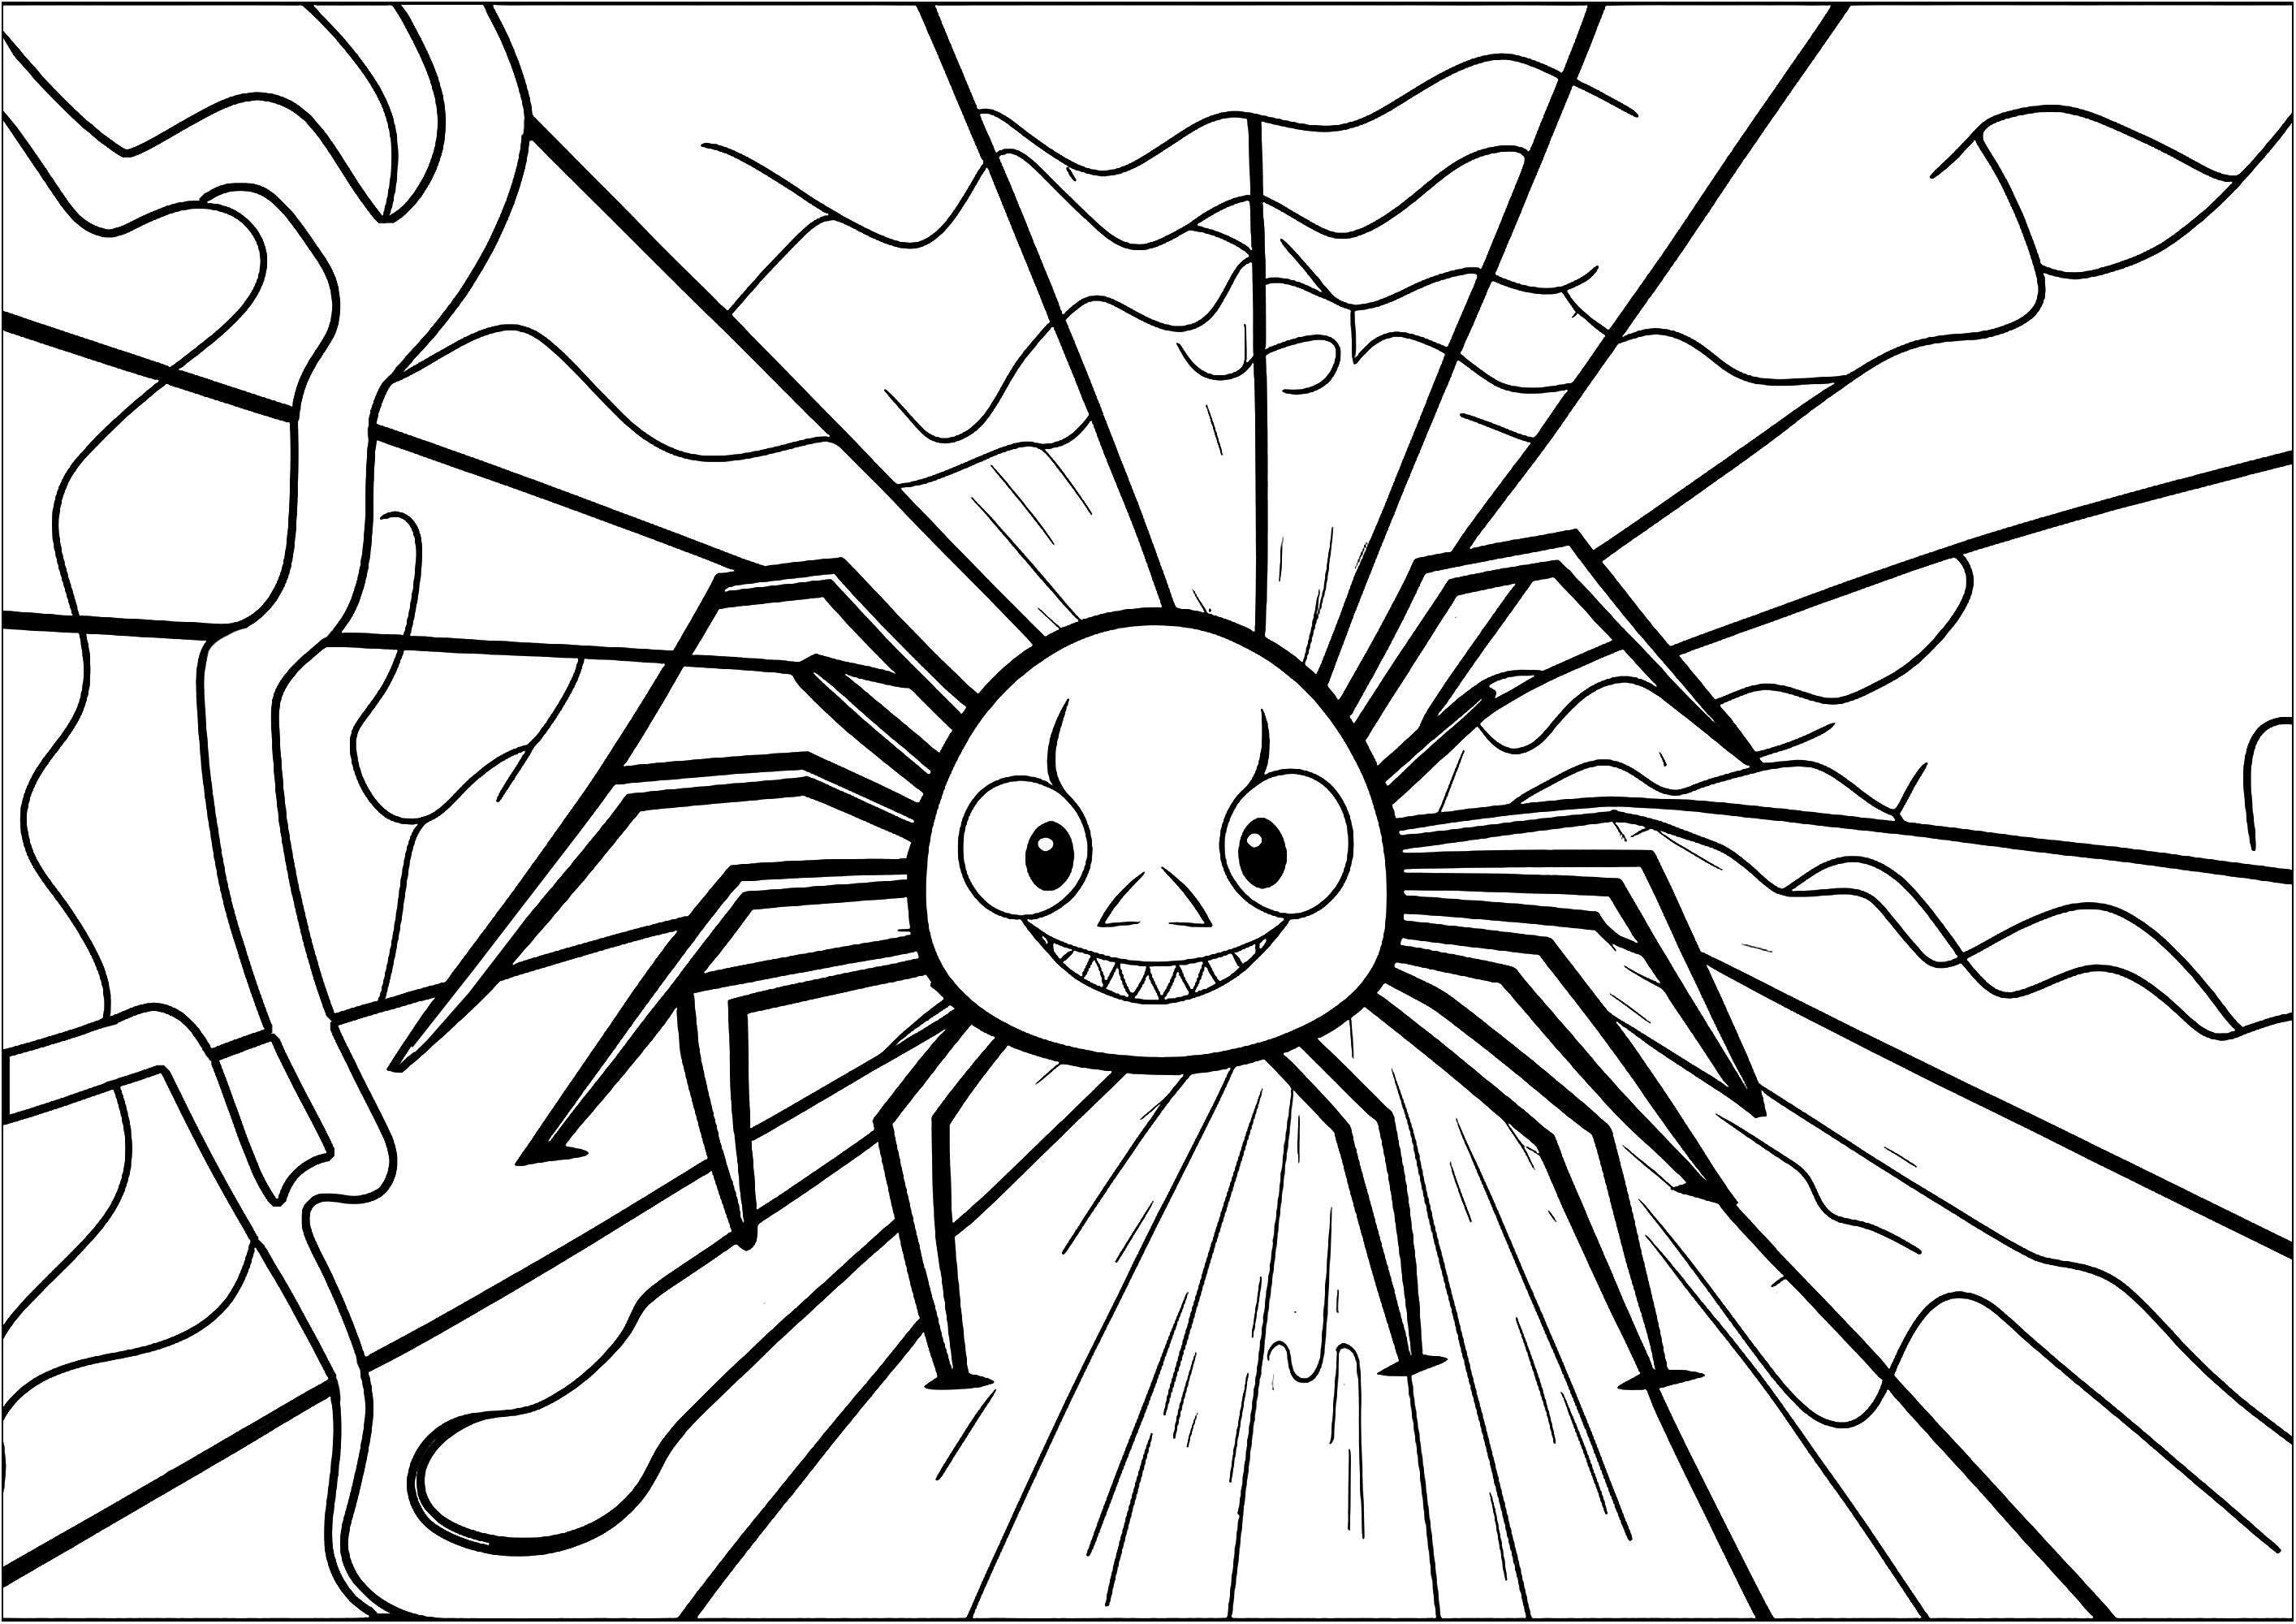 How to Draw a Spooky Spider | Halloween Coloring Pages for Kids | Learn to  Draw - YouTube